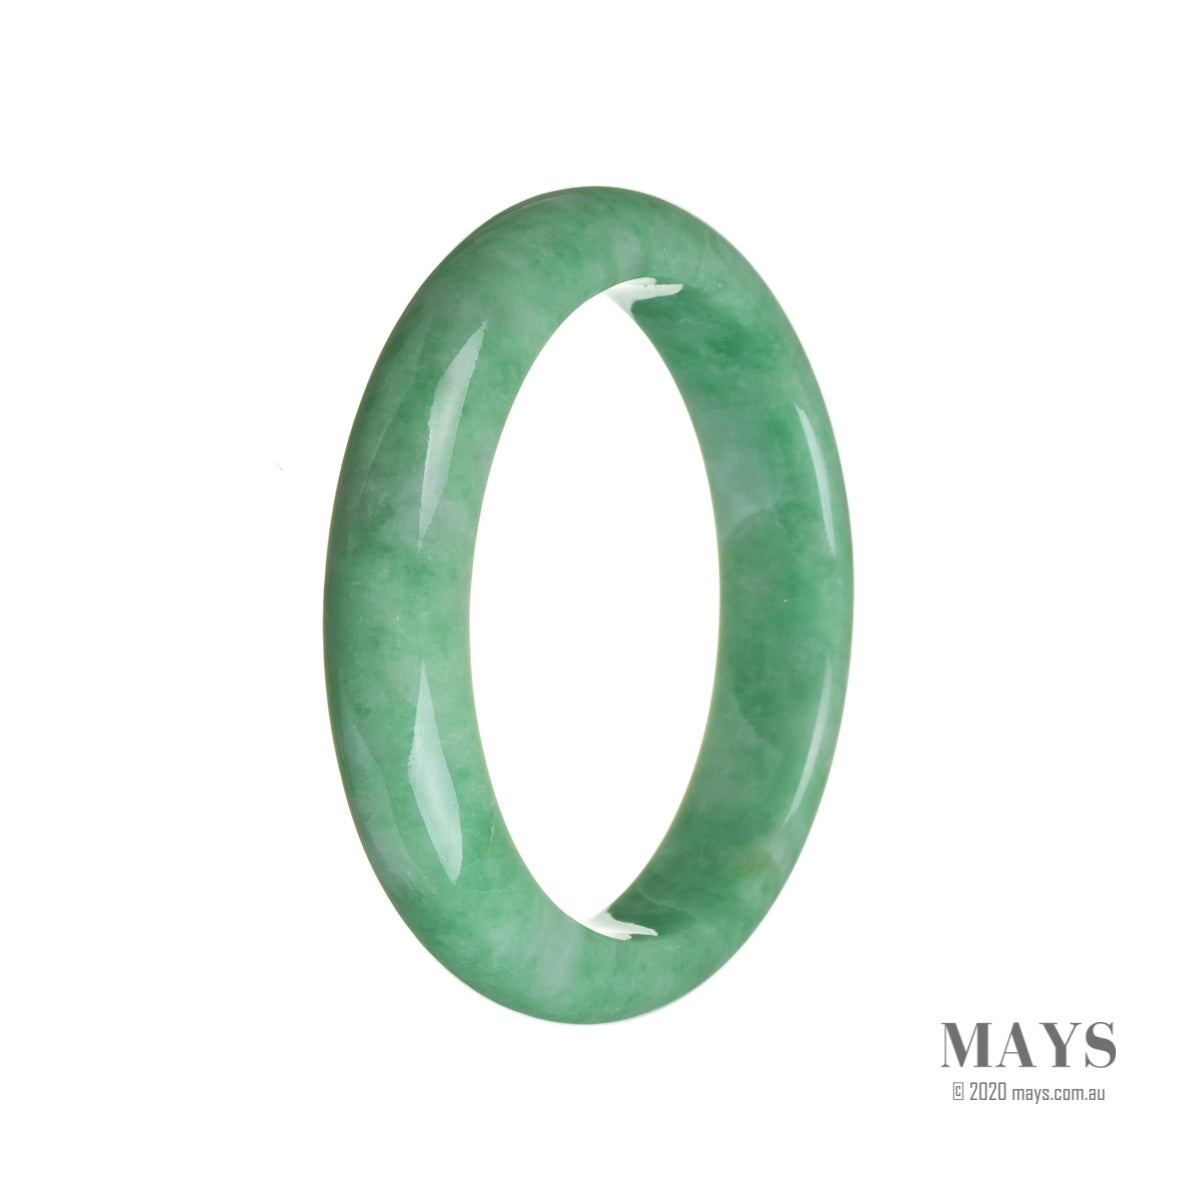 A bright green certified Grade A jade bangle bracelet, semi-round in shape, with a diameter of 58mm.